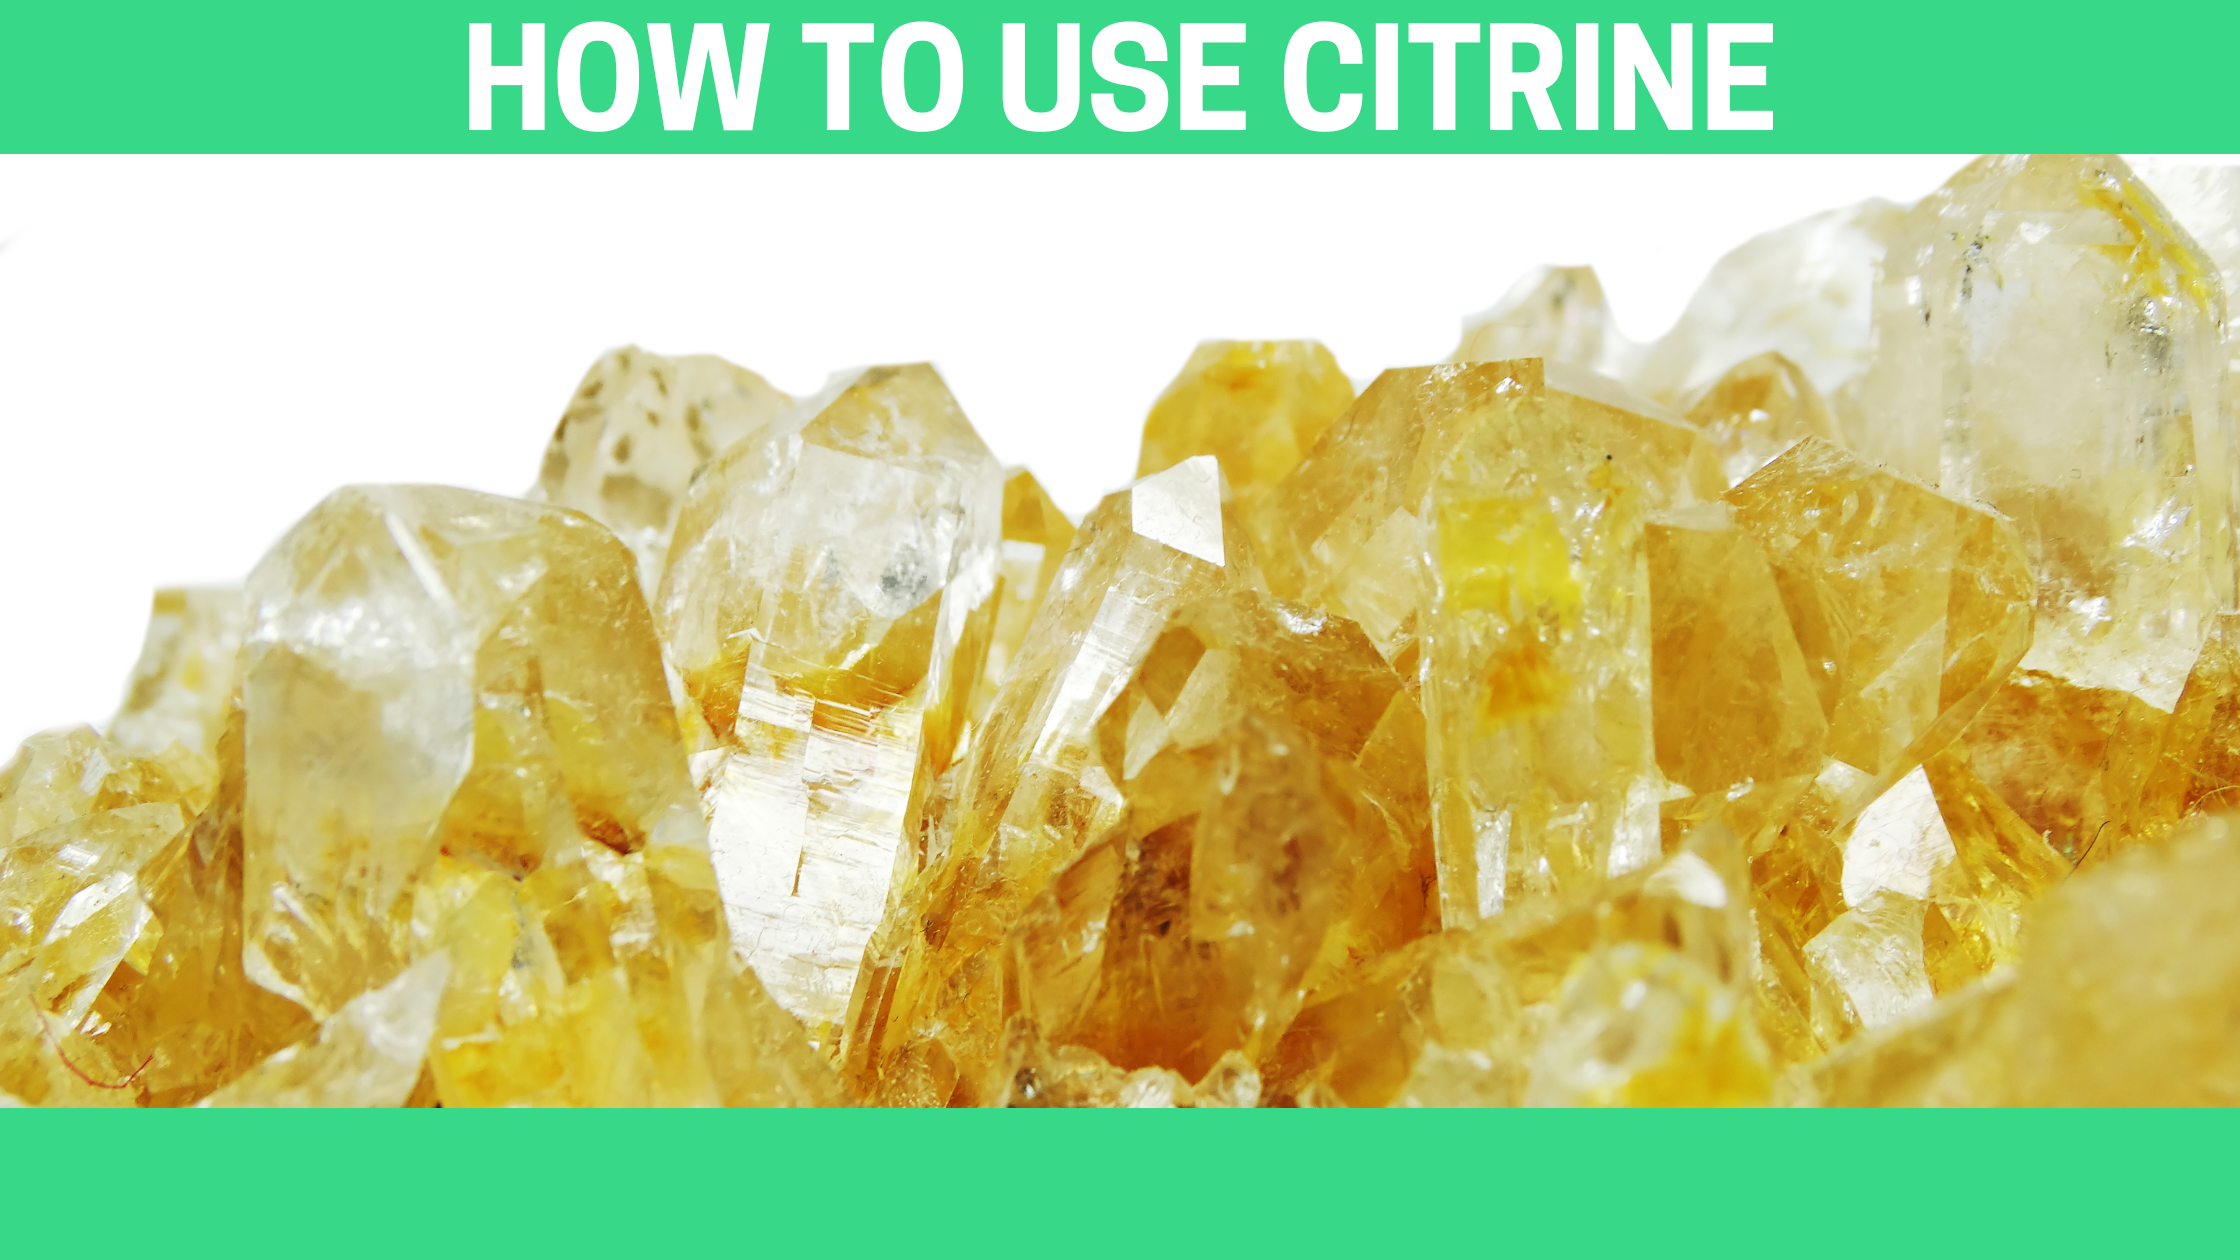 How to Use Citrine